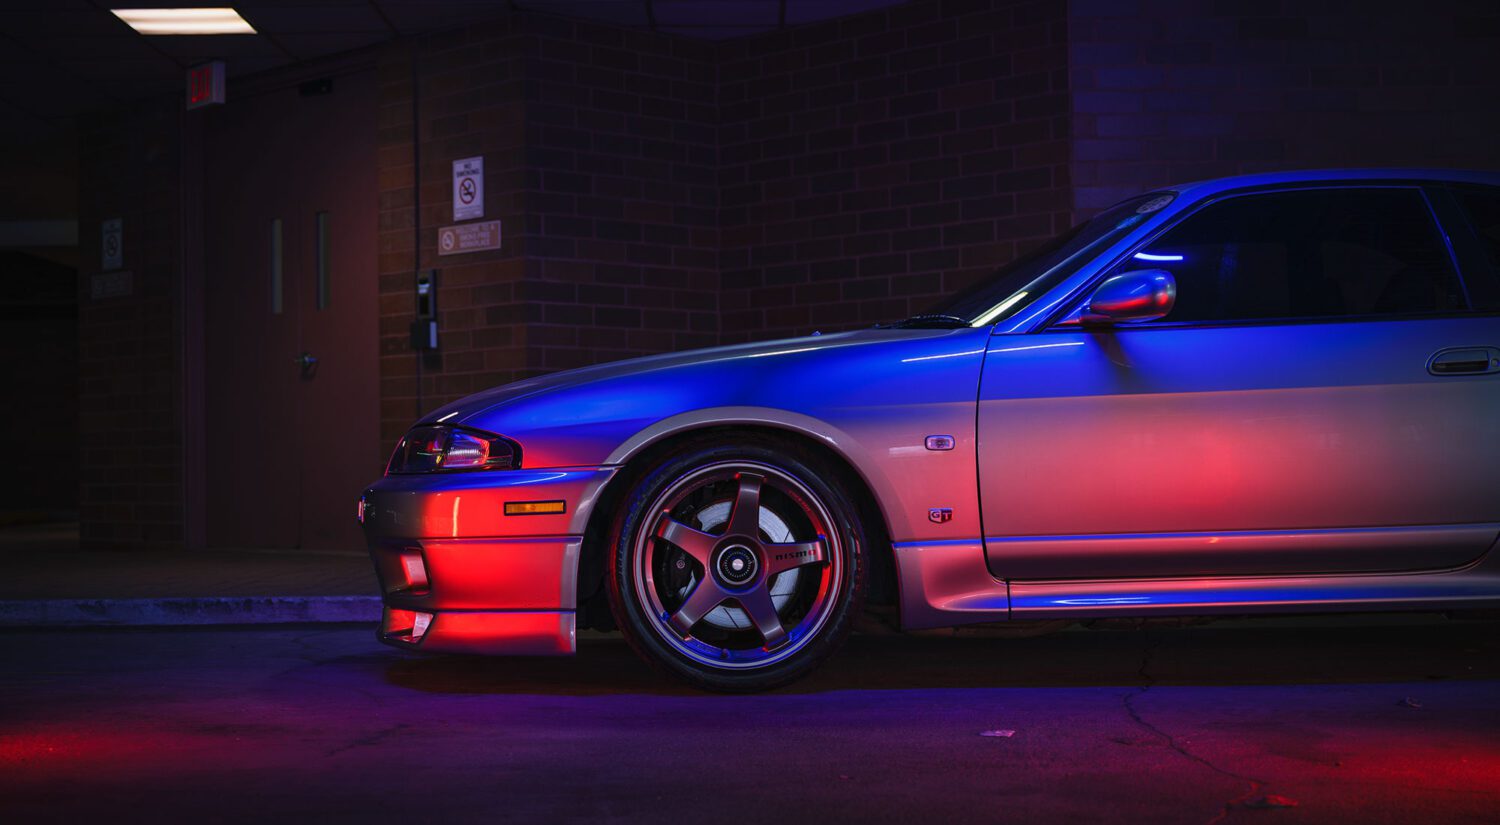 The R33 Nissan Skyline GT-R is as cool as you remember